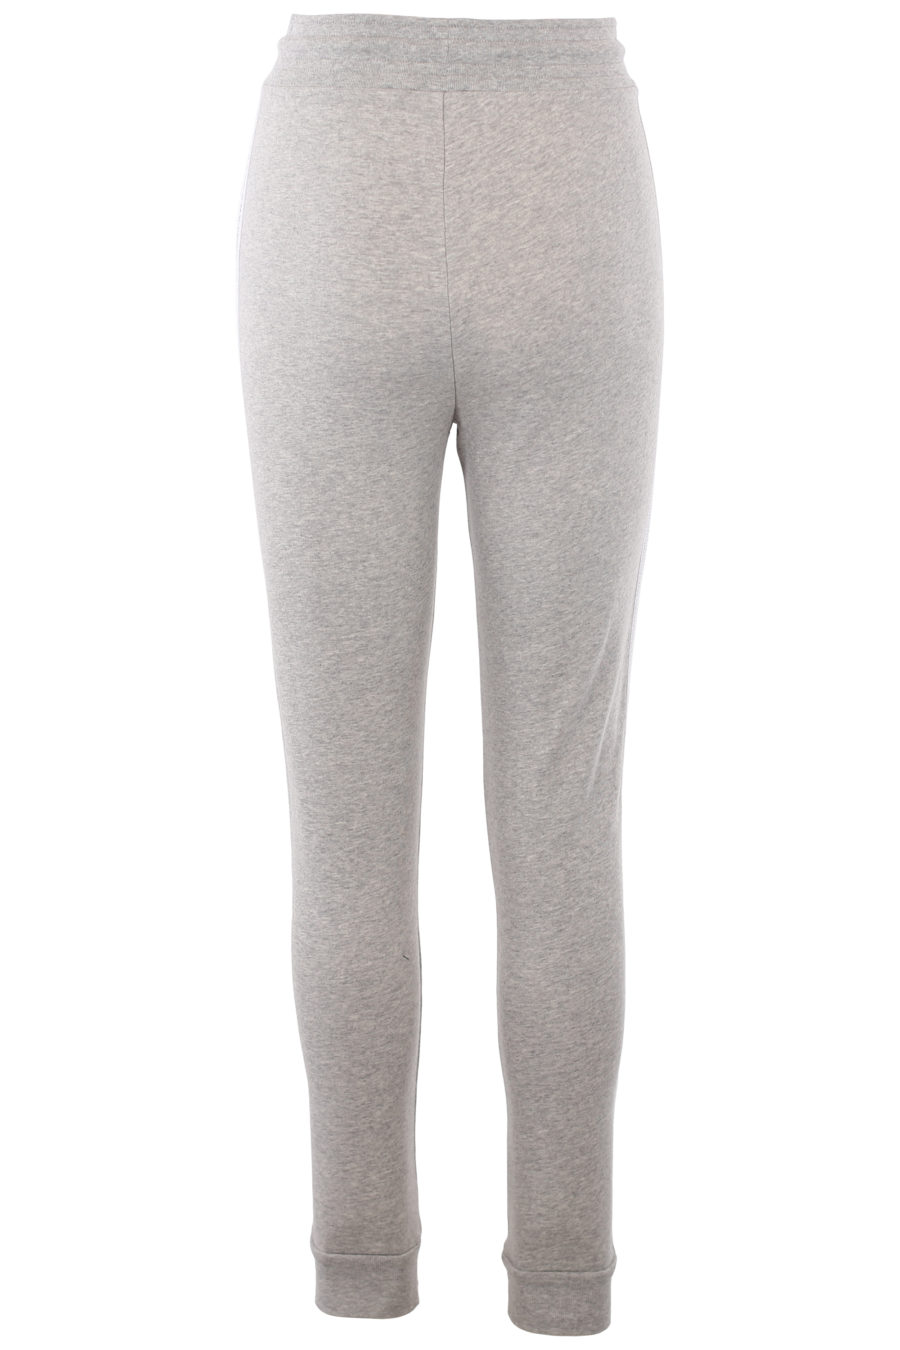 Tracksuit bottoms grey with lace effect logo - IMG 1353